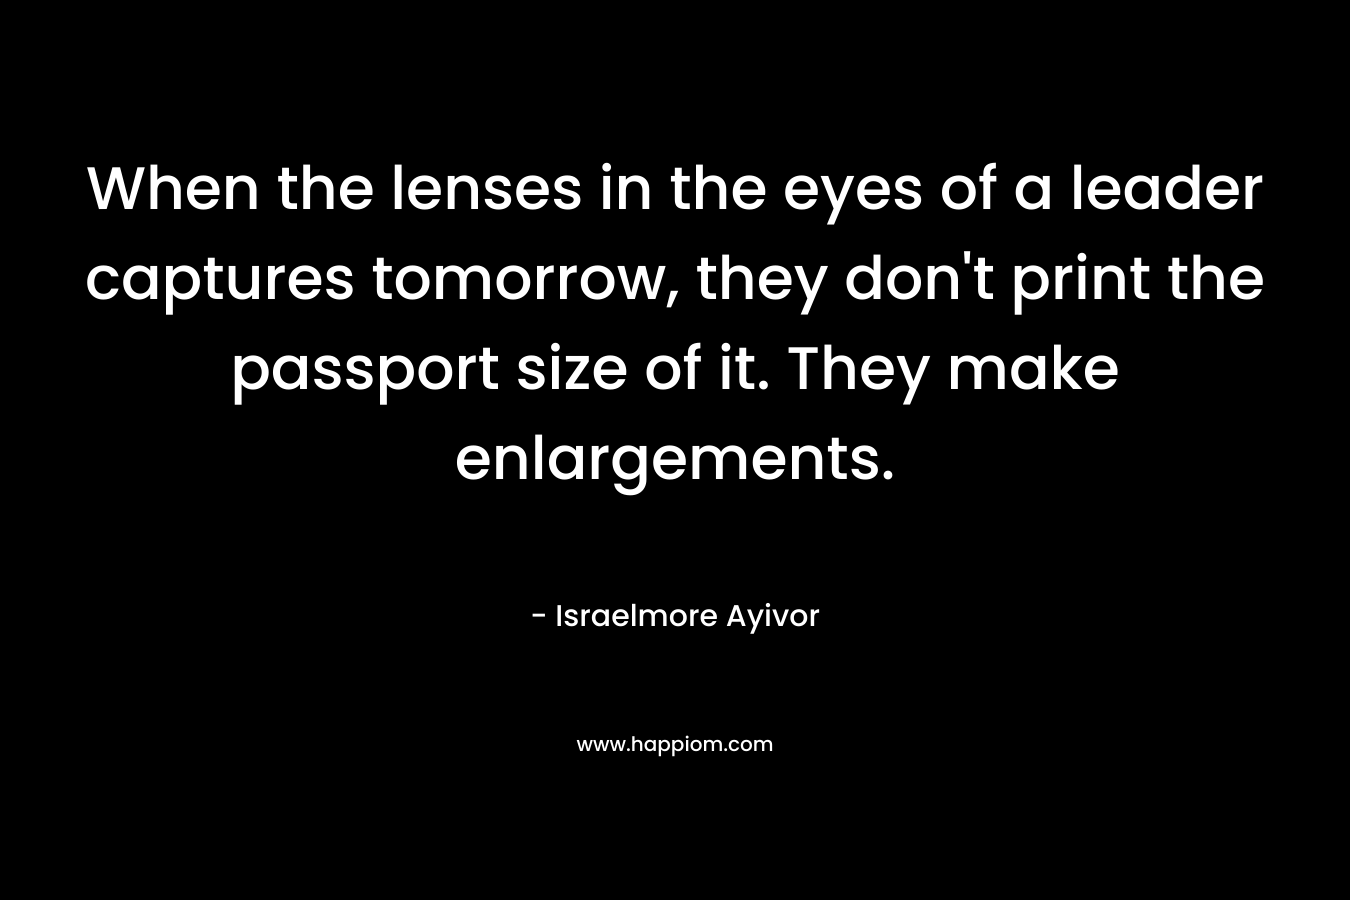 When the lenses in the eyes of a leader captures tomorrow, they don’t print the passport size of it. They make enlargements. – Israelmore Ayivor